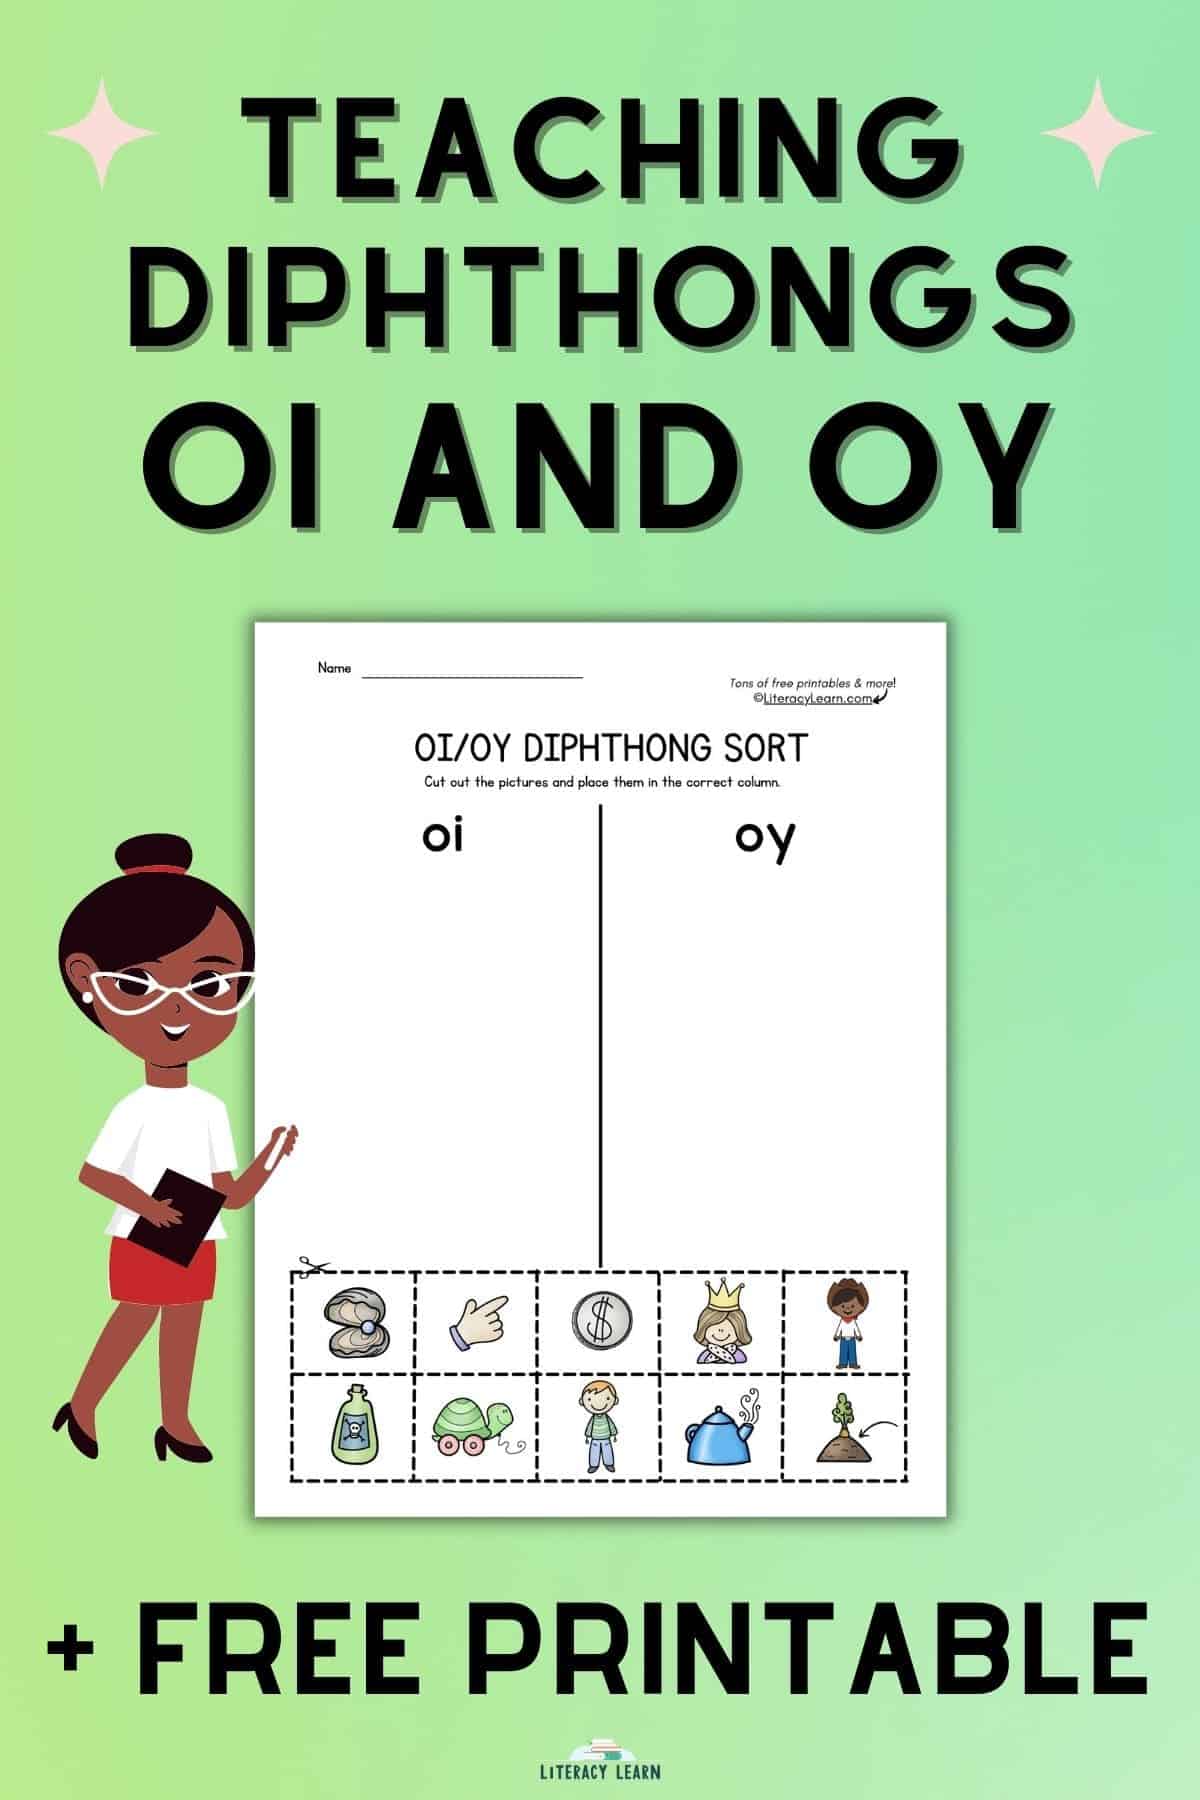 Diphthongs OI and OY with free printable worksheet displayed and clipart of teacher.